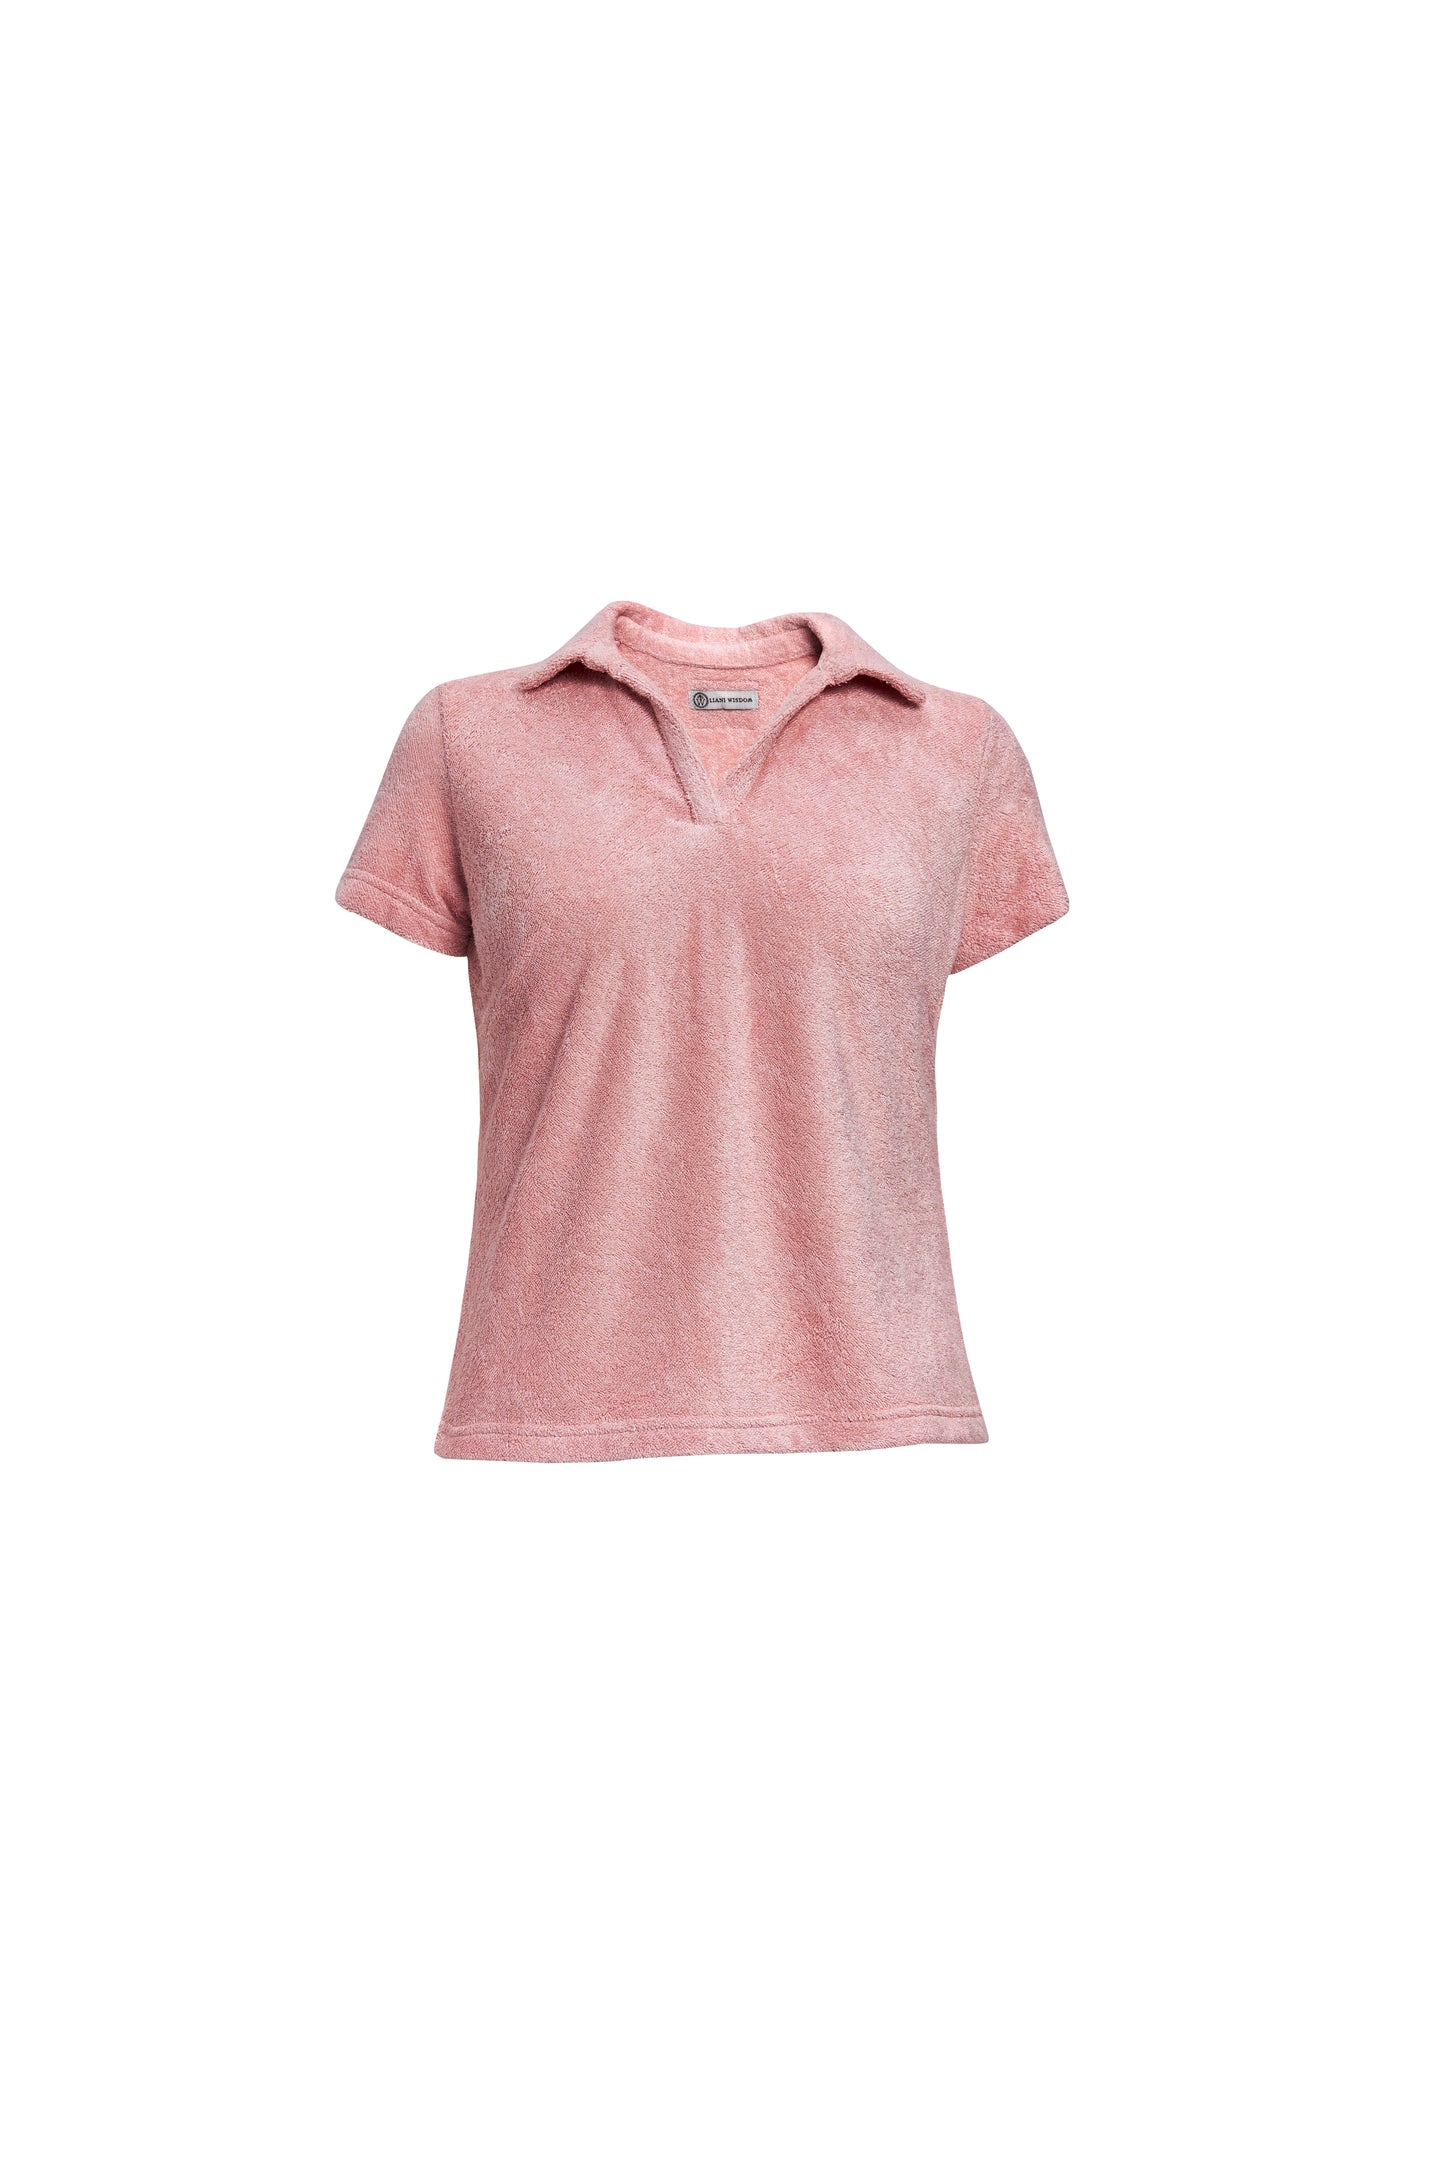 ETHICAL POLO T SHIRT